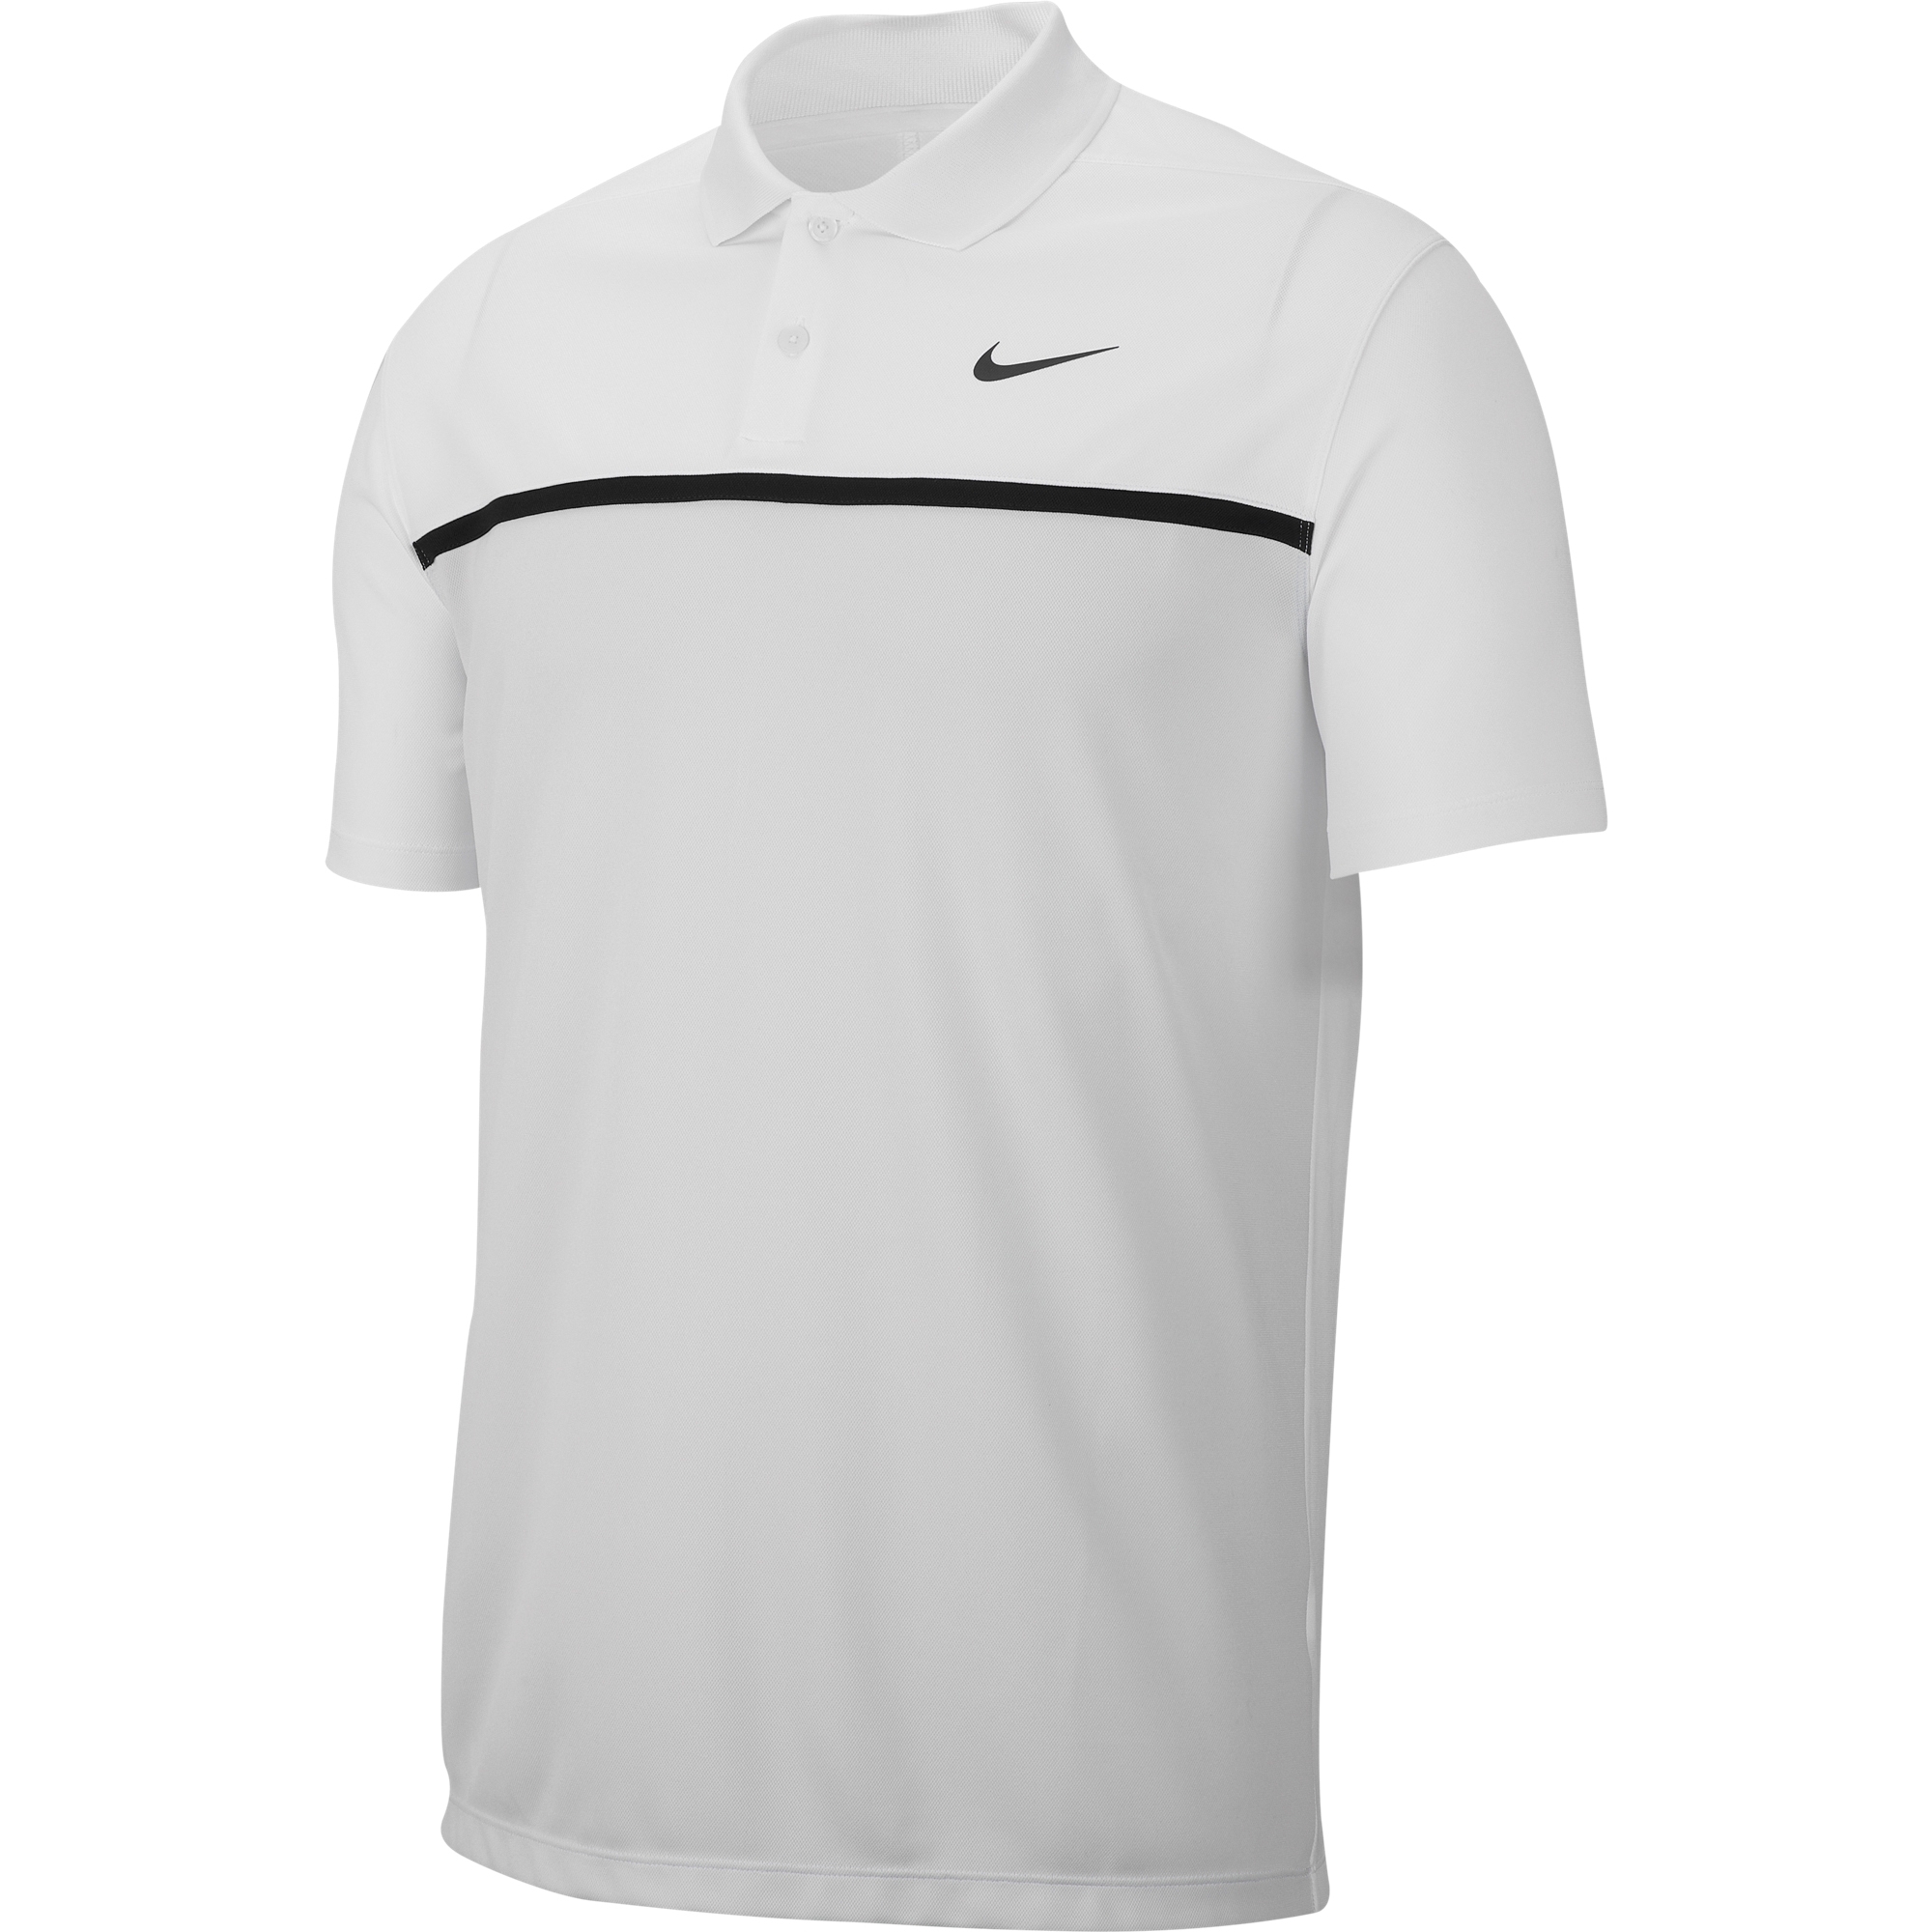 Nike Mens Dry Fit Victory Golf Polo Shirt S- Chest 35-37.5